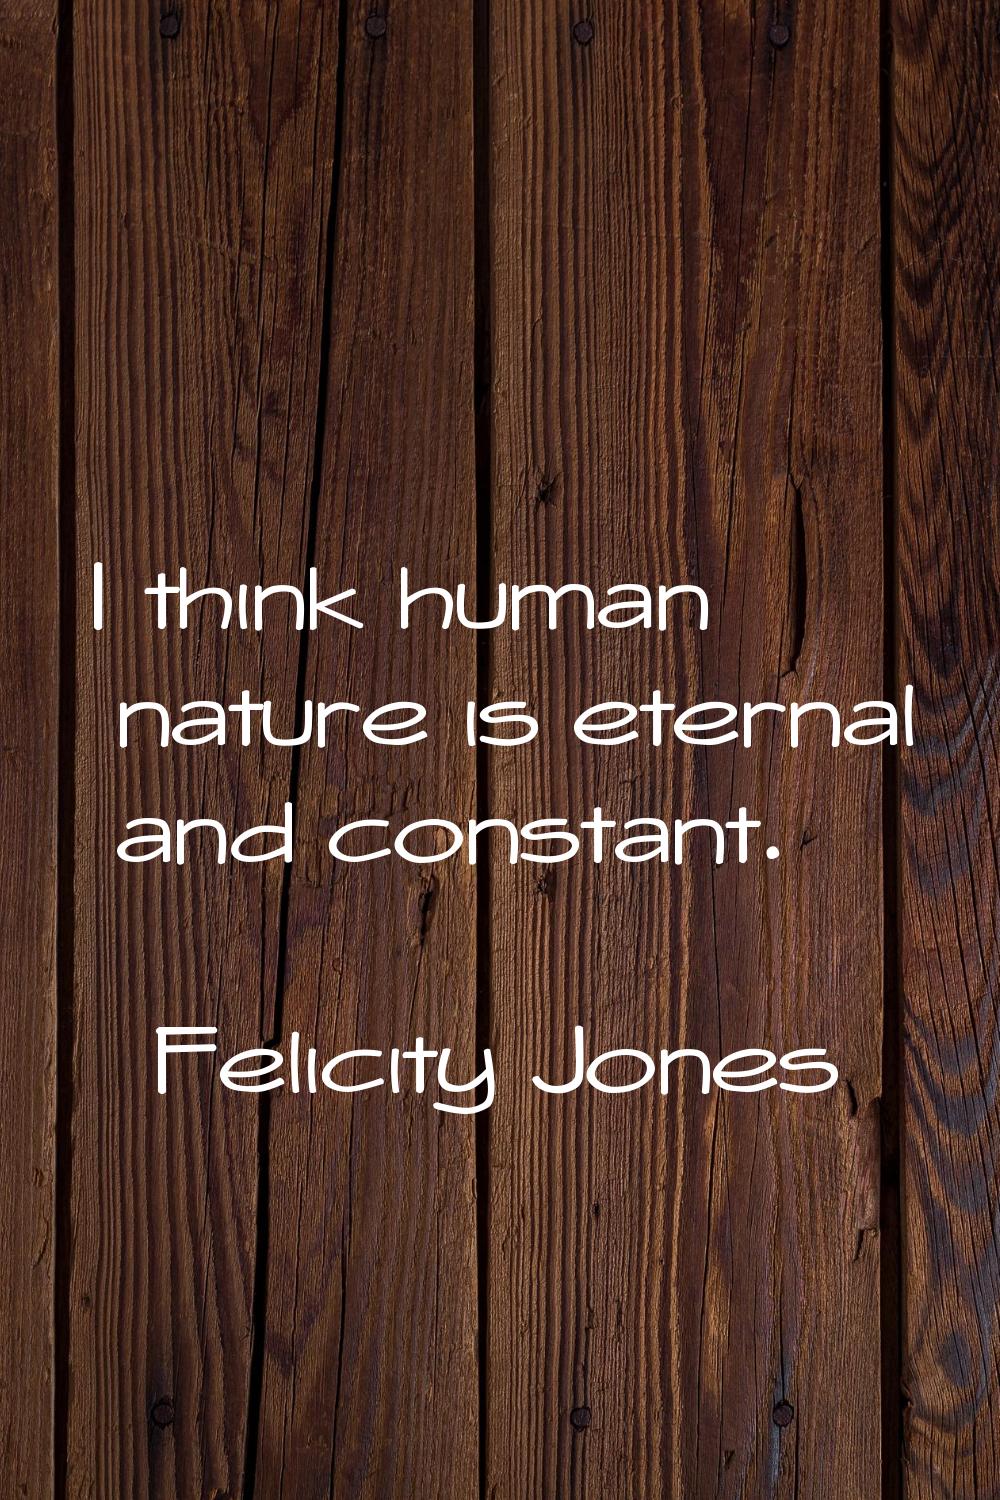 I think human nature is eternal and constant.